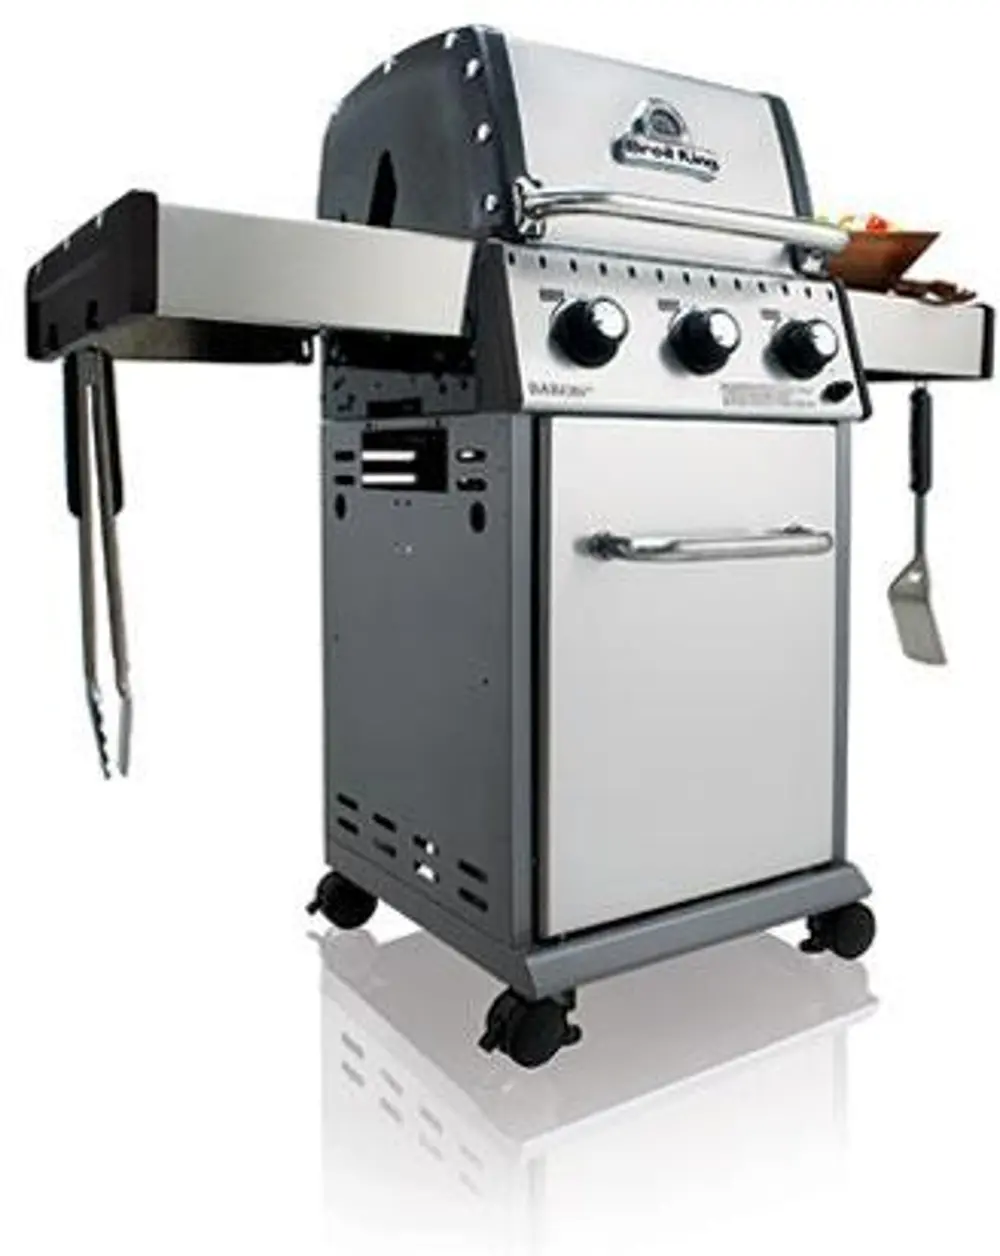 961557,NG,BARON-320 Broil King Baron 320S Stainless Steel Grill-1